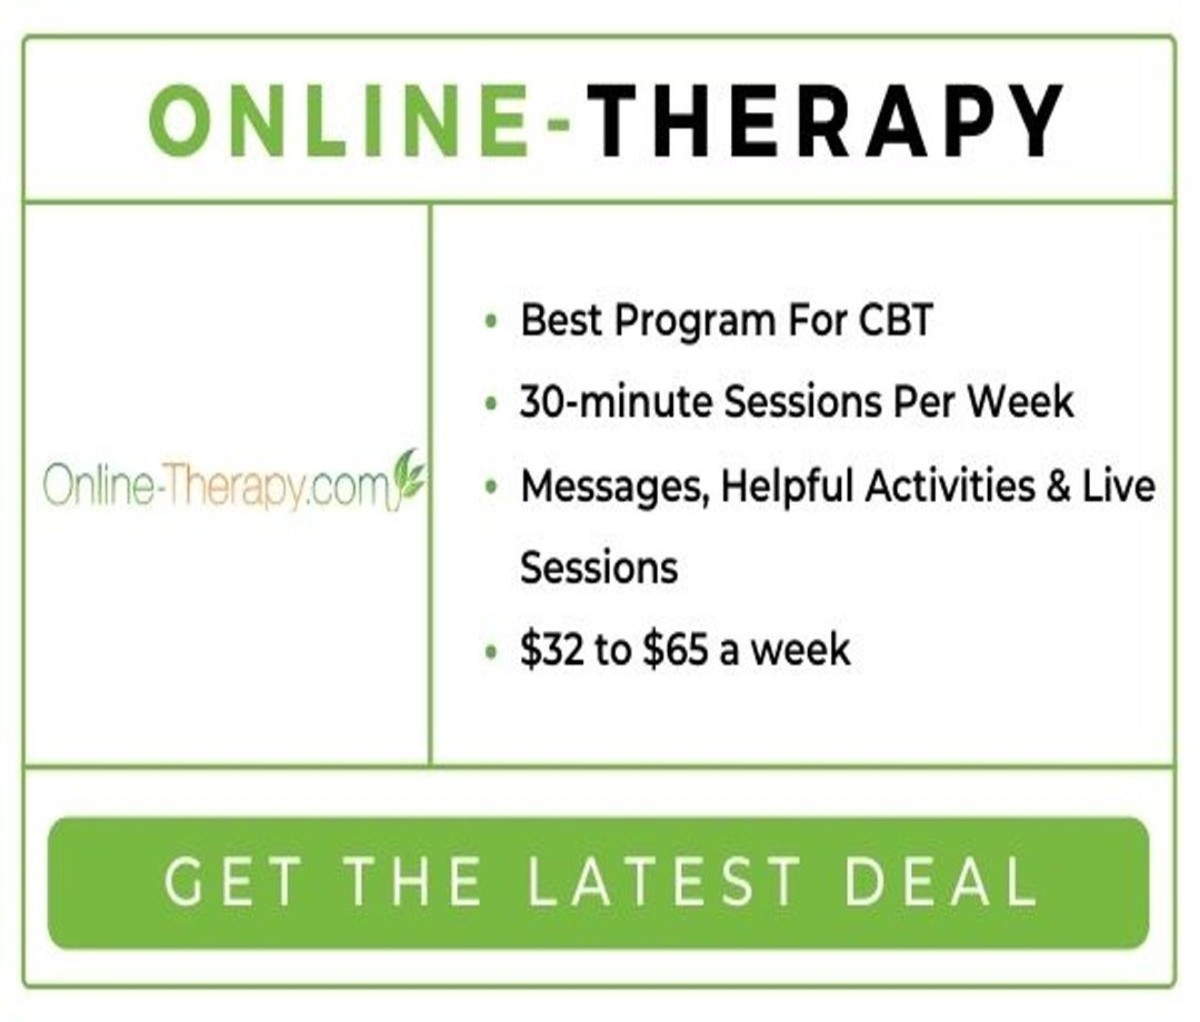 OnlineTherapy.com - Licensed Therapists With Affordable Therapy Options